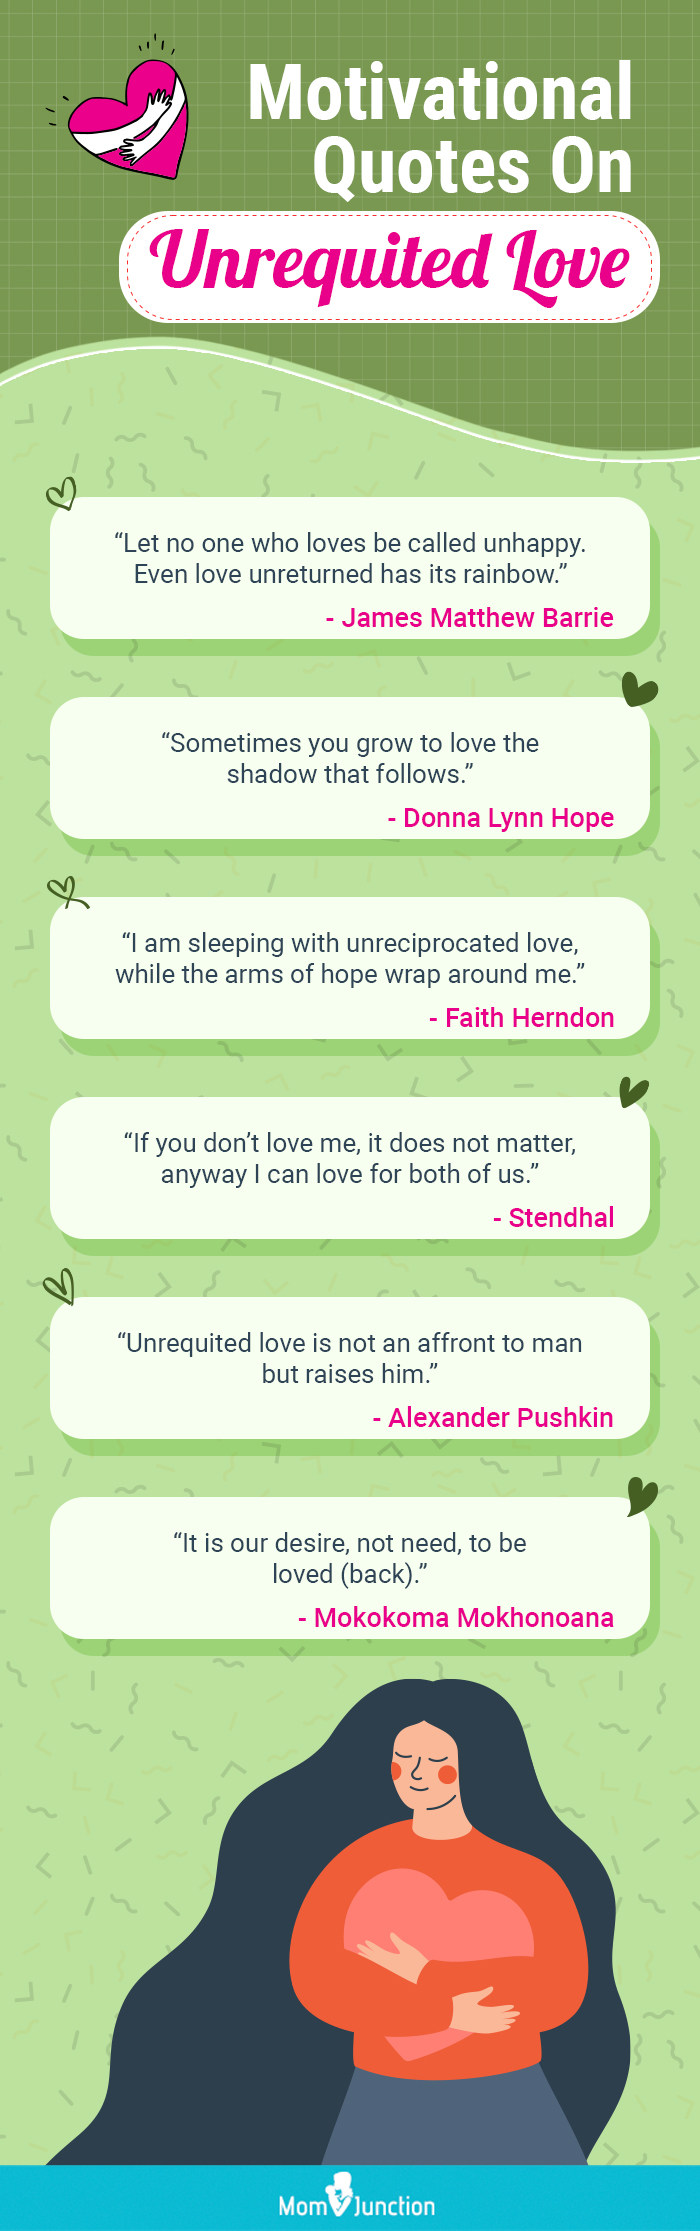 motivational quotes on unrequited love [infographic]